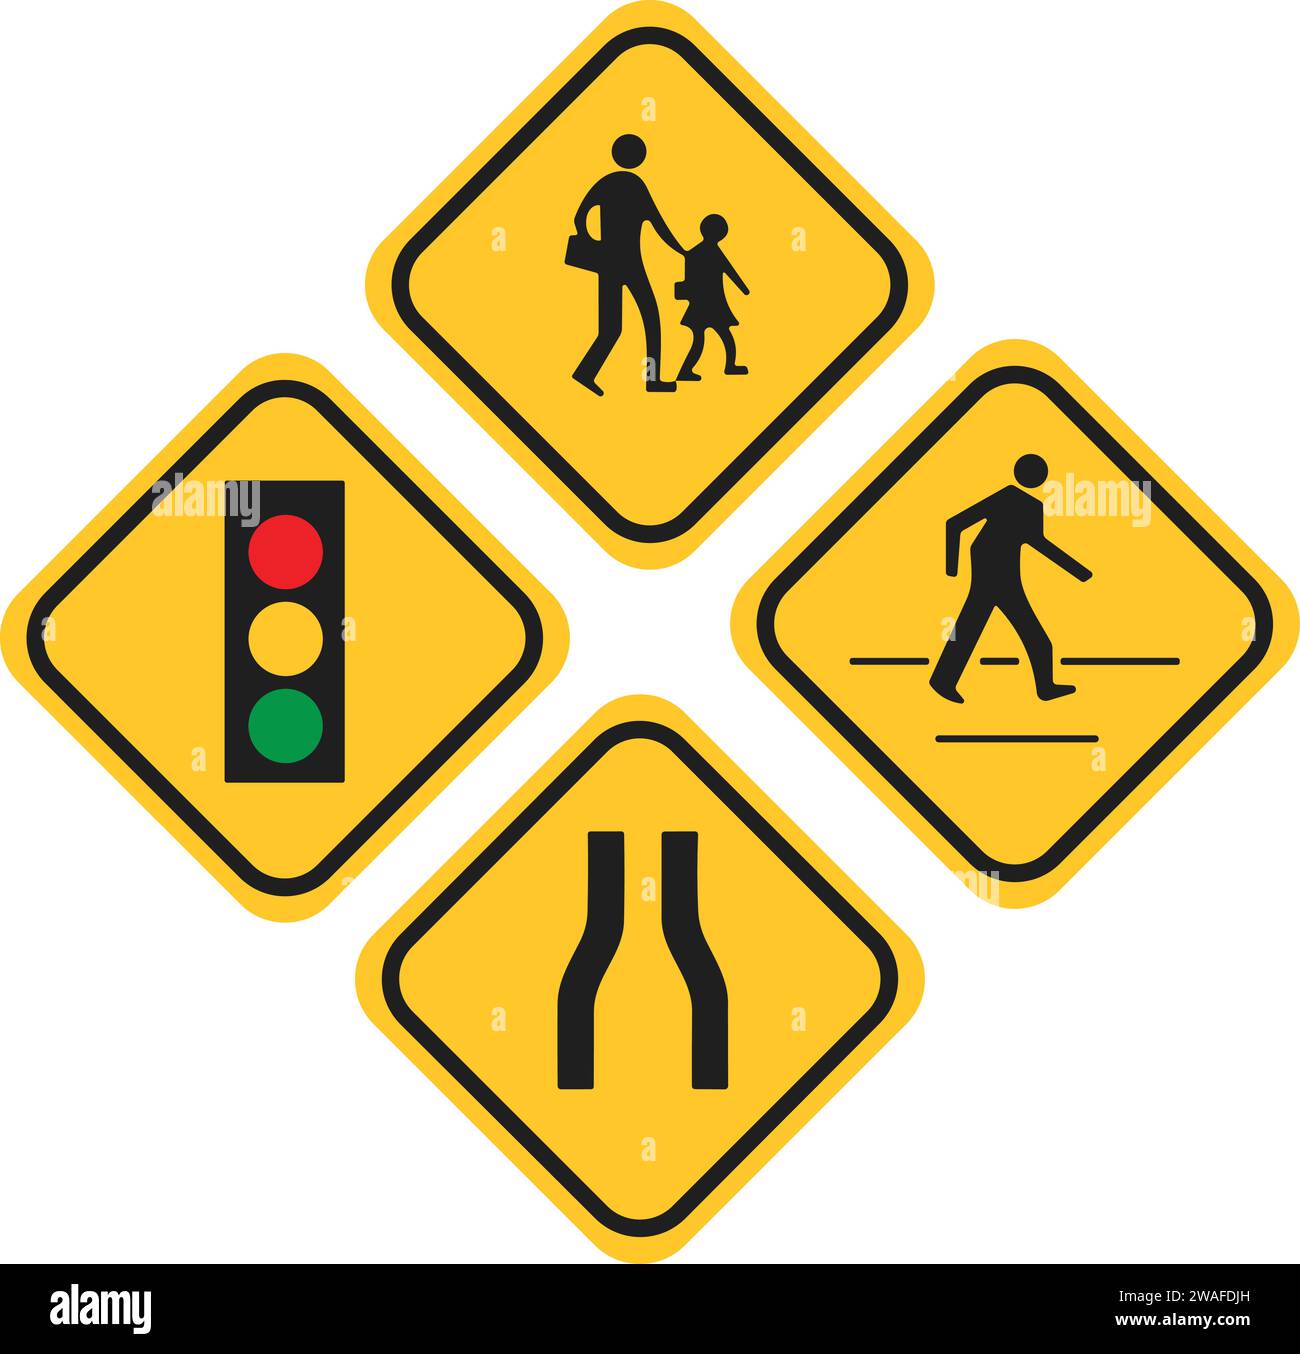 Road Waking sign |Traffic light sign | Traffic signs vector Stock Vector